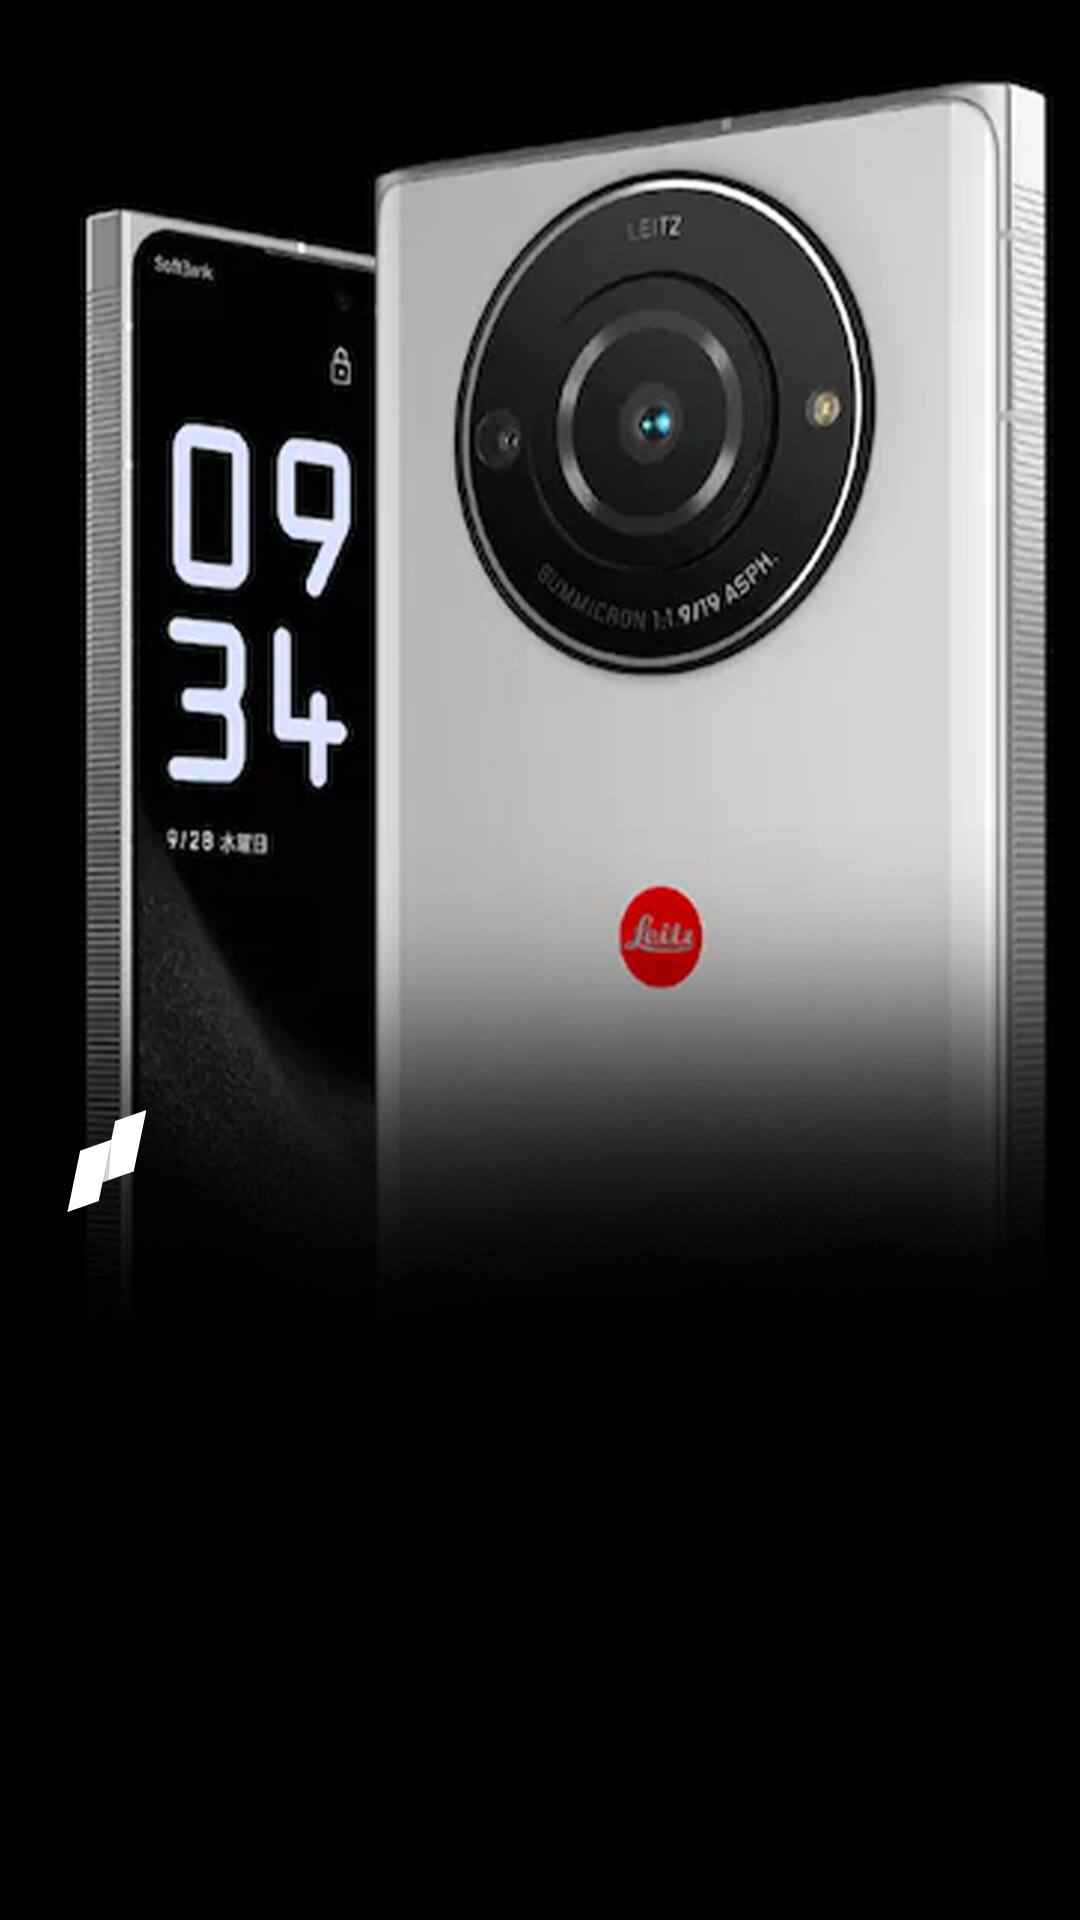 Leica Leitz Phone 2 goes official